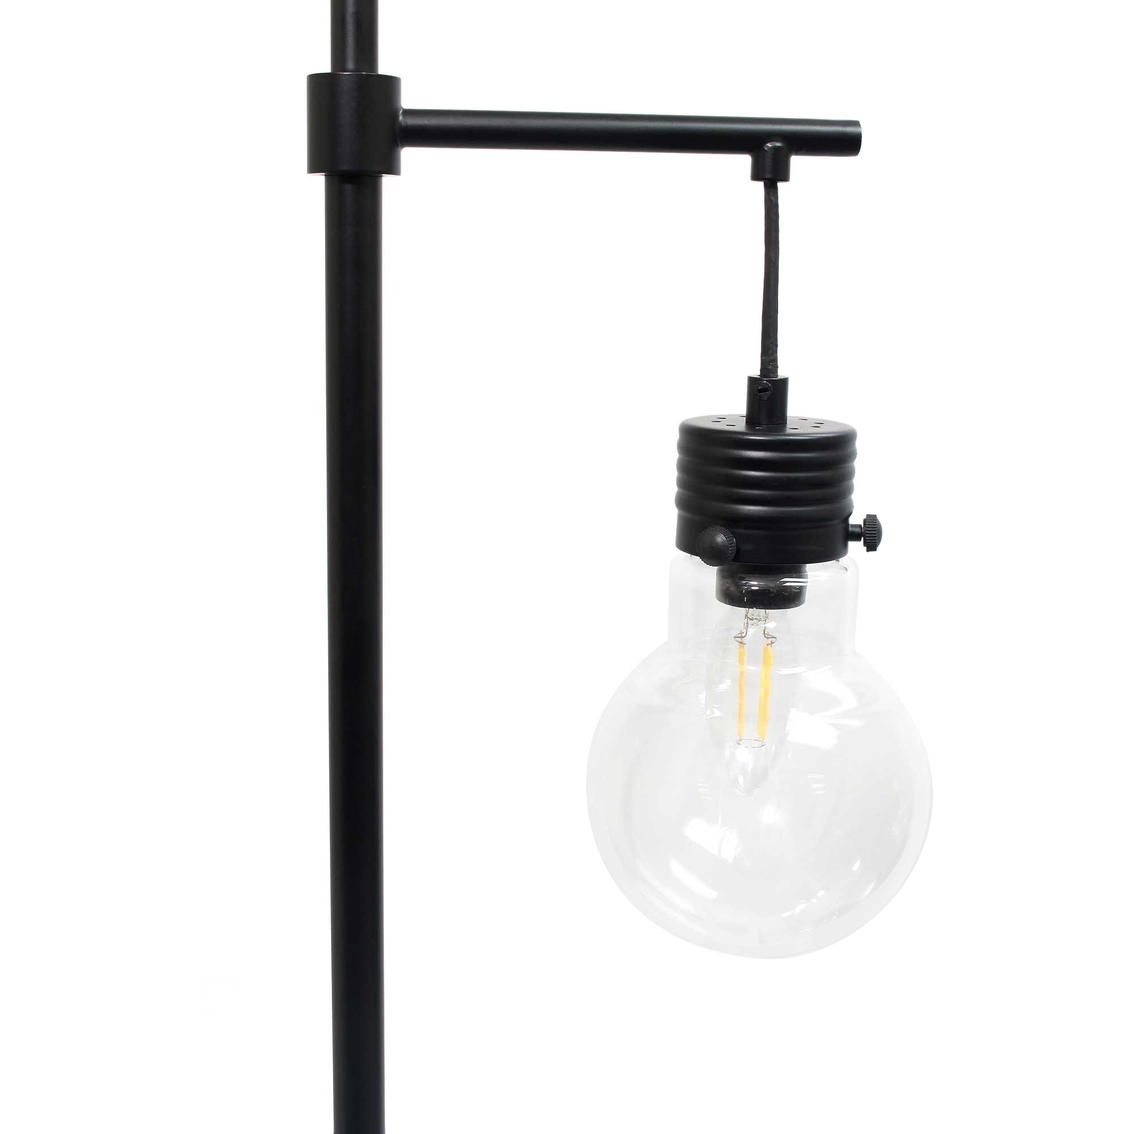 Lalia Home Black Matte 1 Light Beacon Floor Lamp with Clear Glass Shade - Image 3 of 9